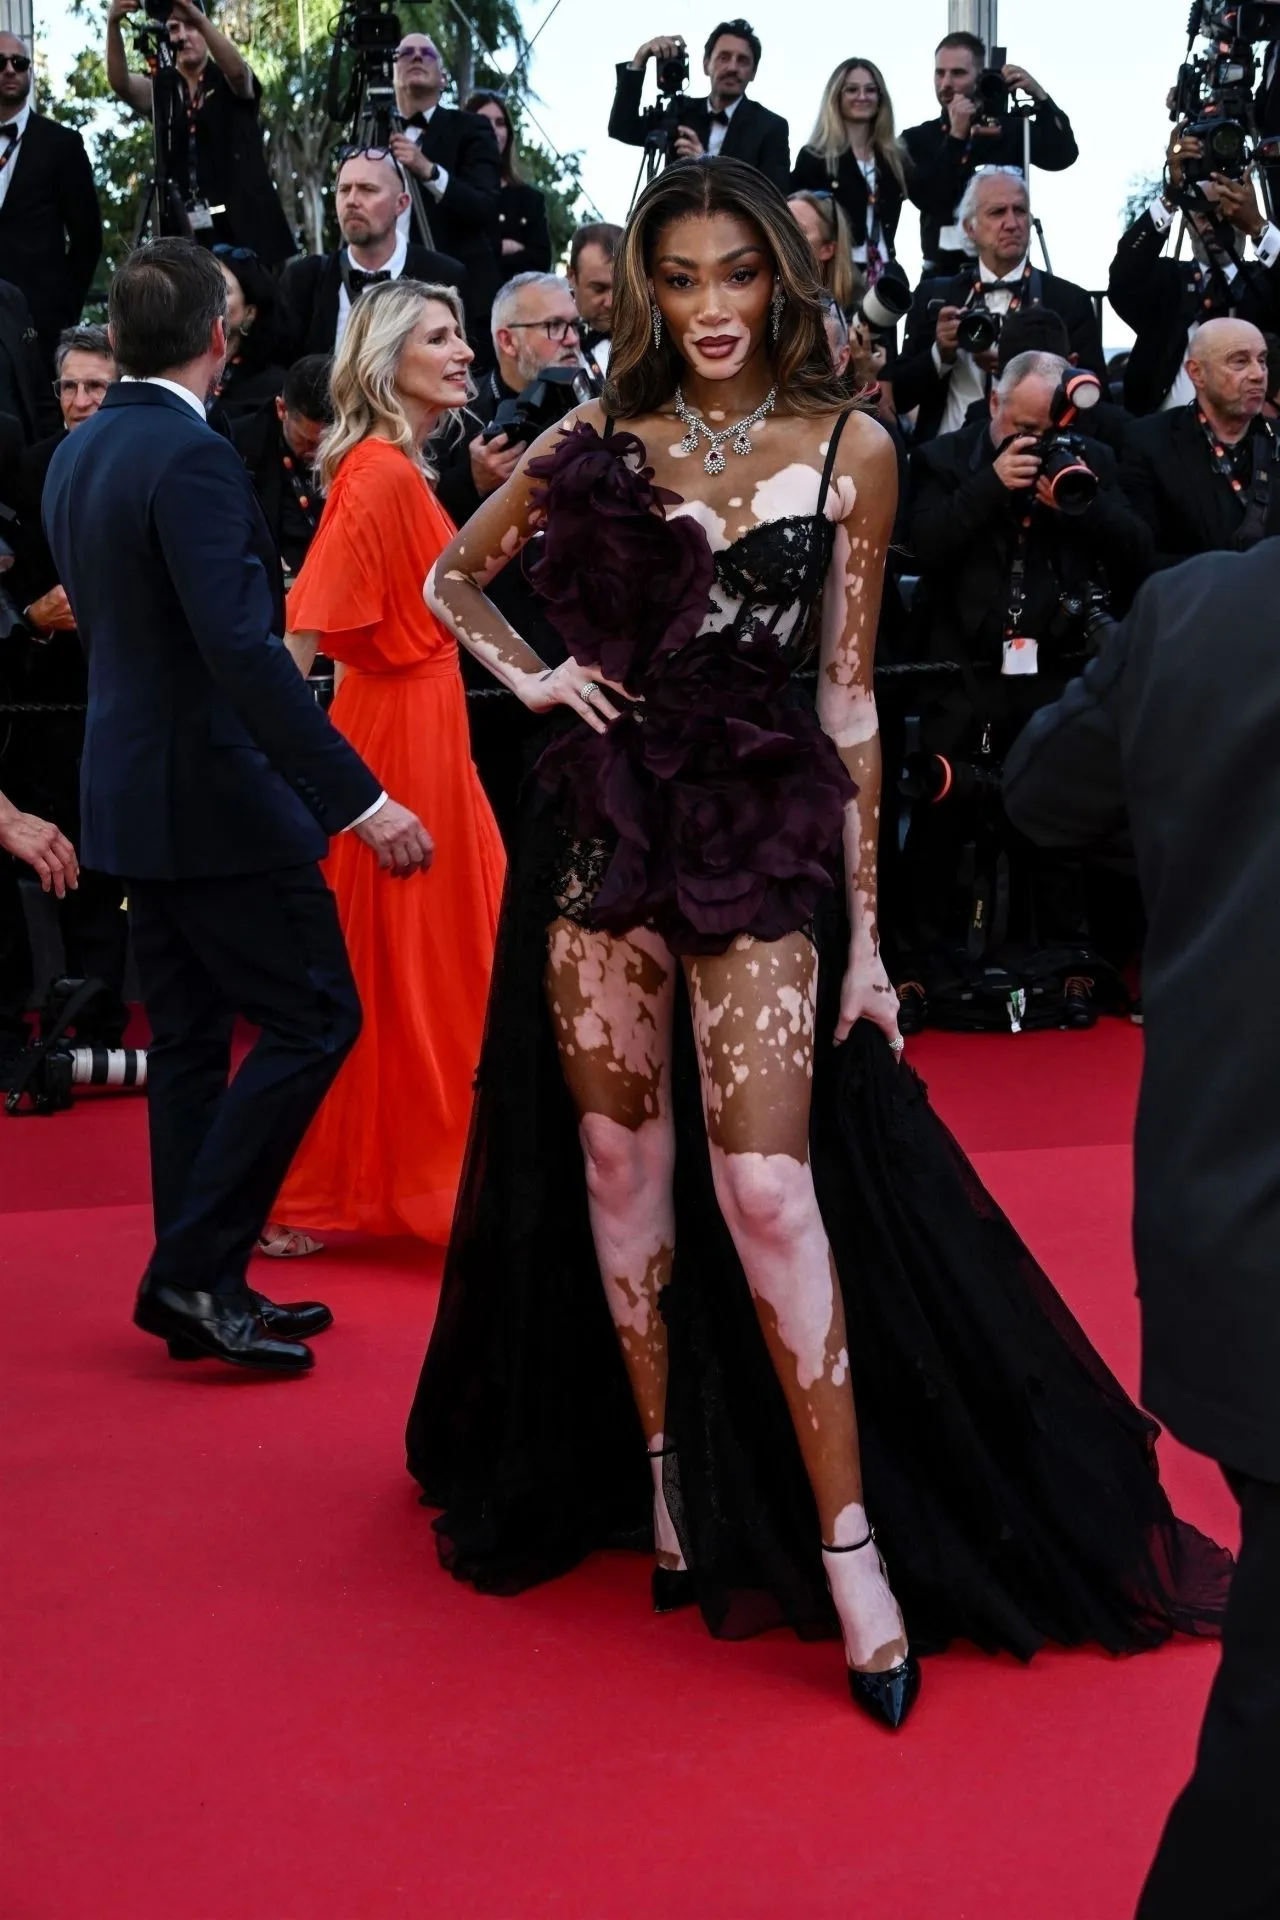 WINNIE HARLOW AT THE COUNT OF MONTE CRISTO PREMIERE AT CANNES FILM FESTIVAL